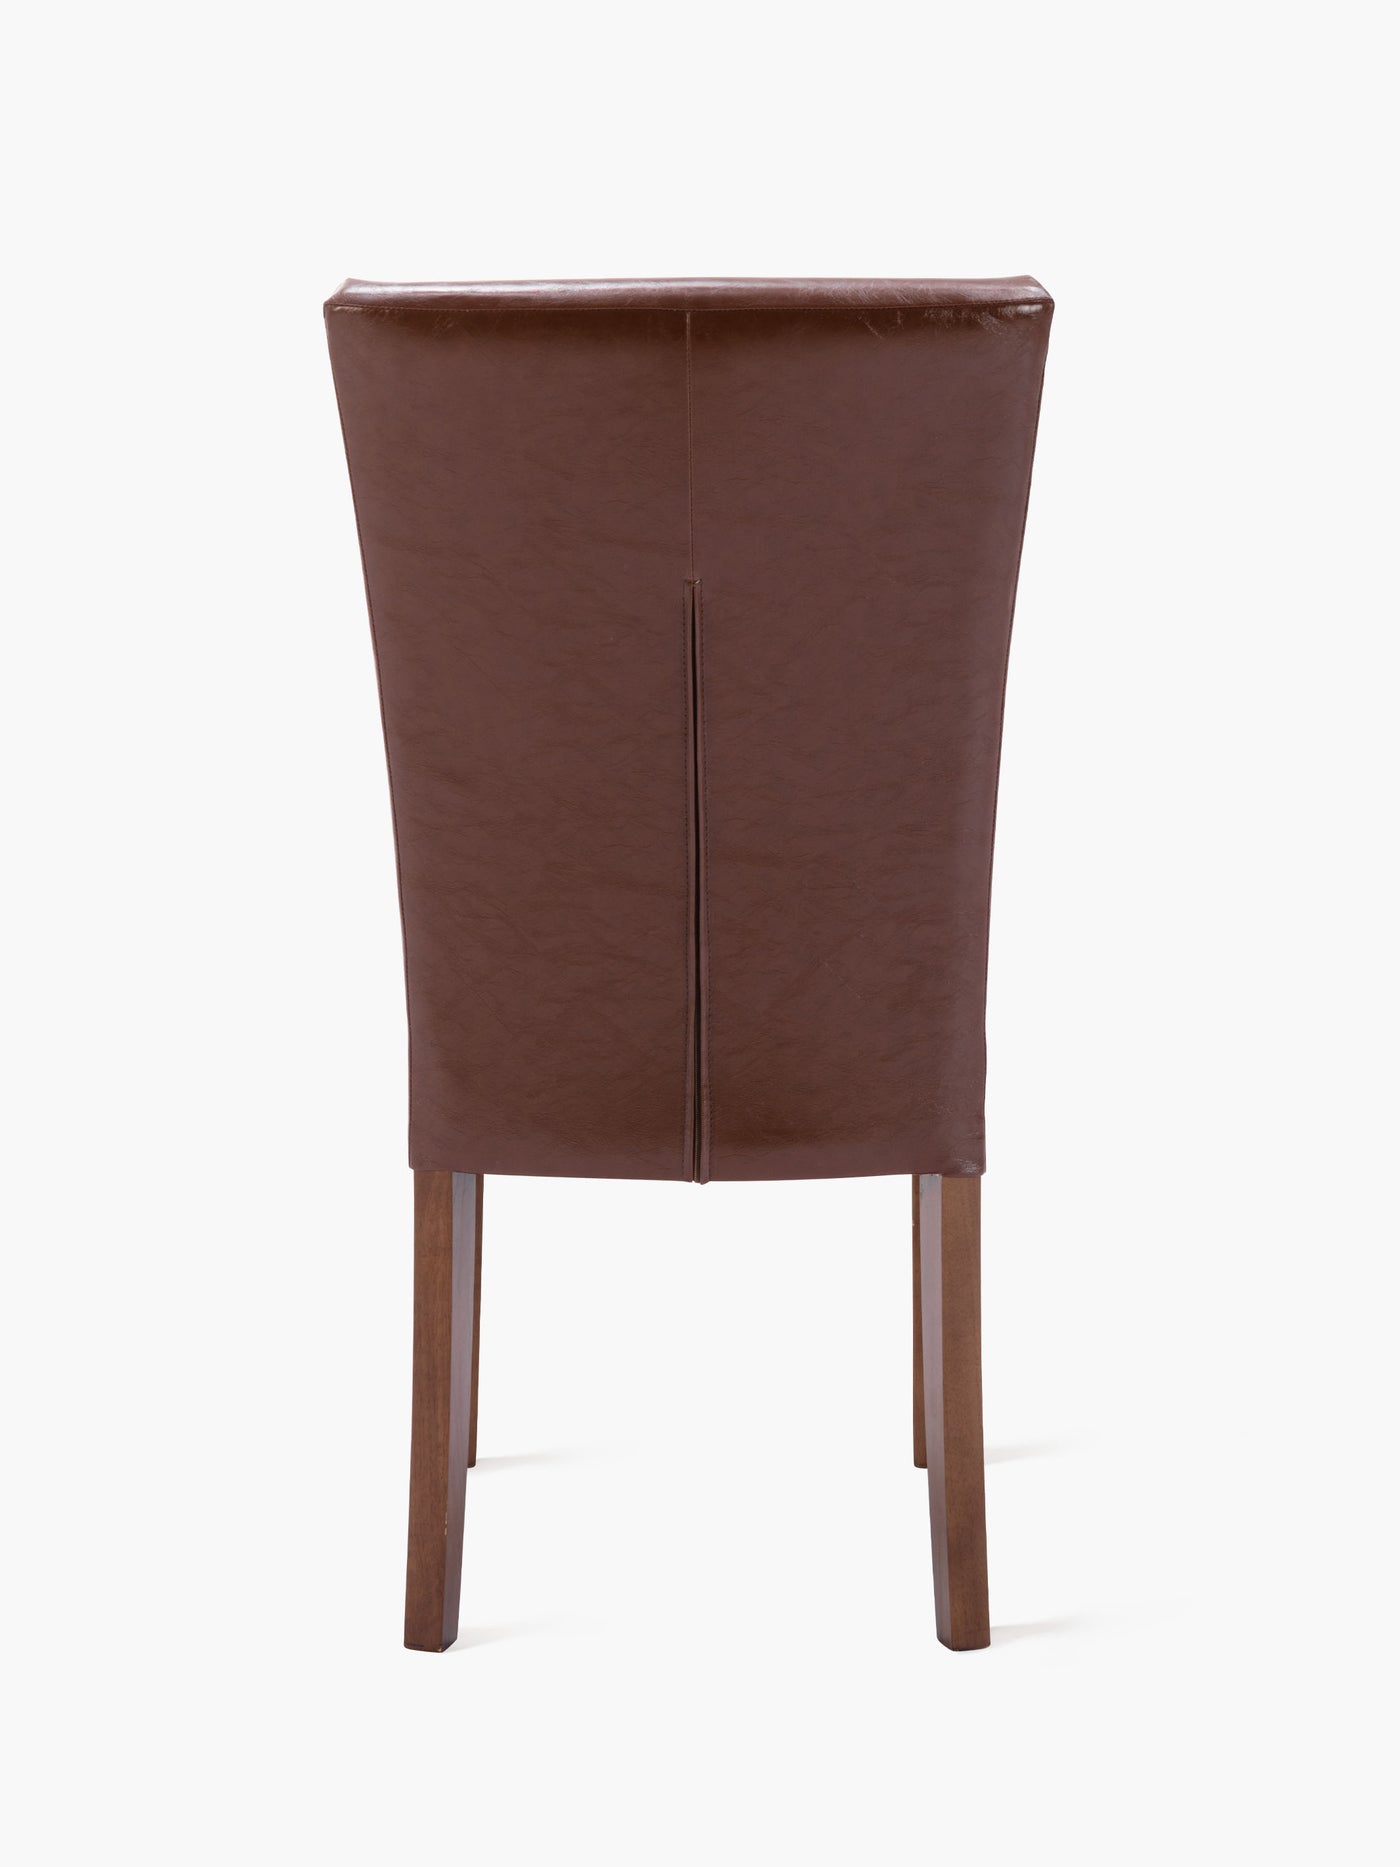 COLAMY Dining Chair with Solid Wood Legs CL420 Light Brown #color_lightbrown